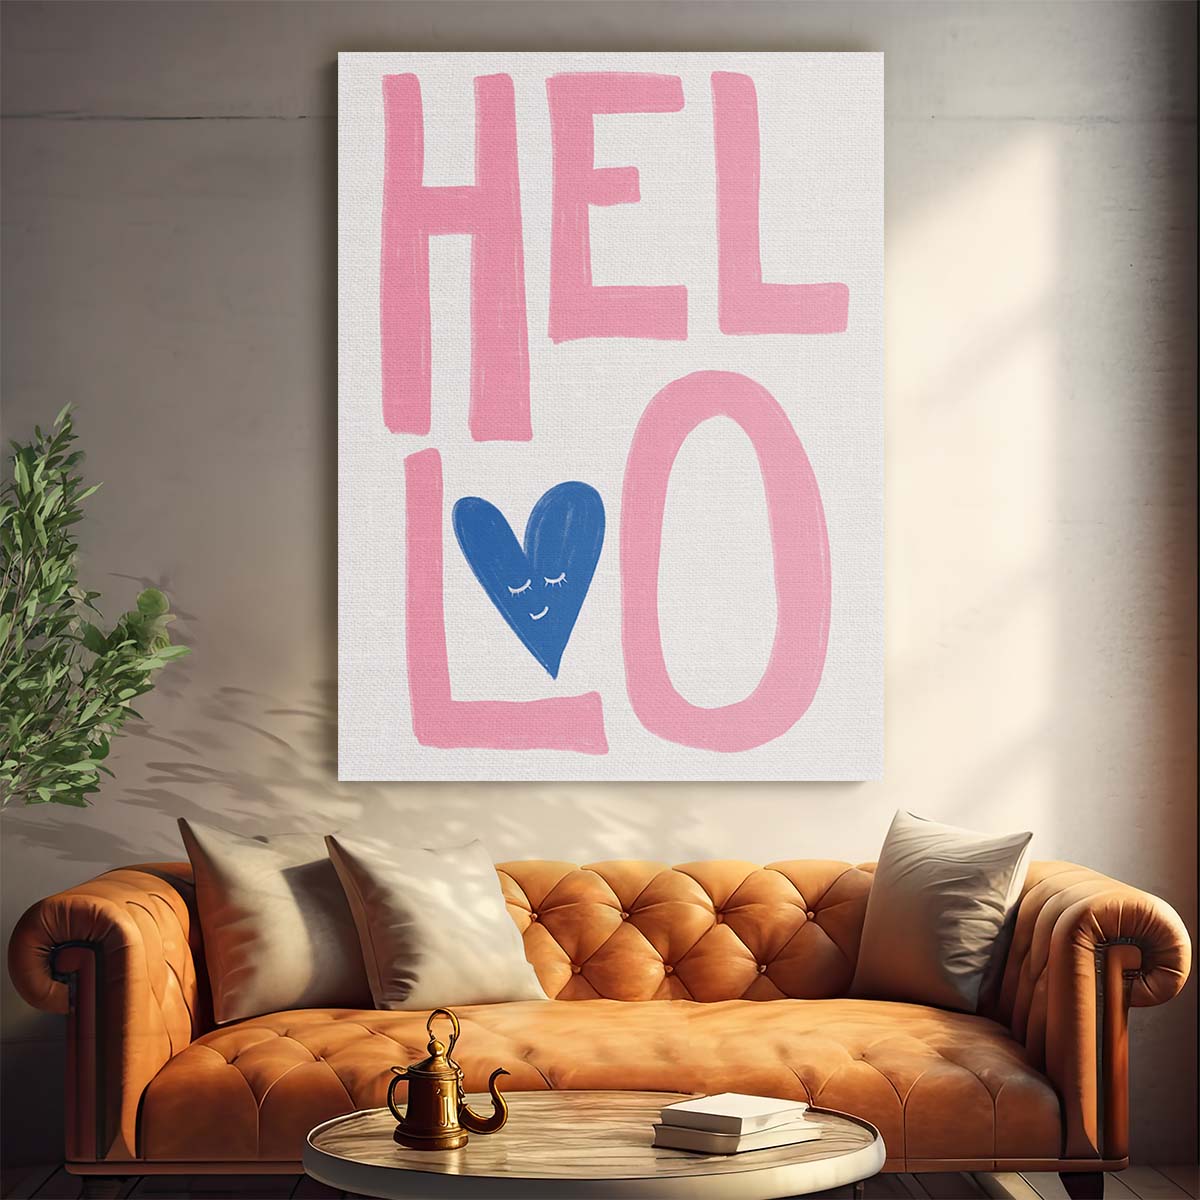 Inspirational Pink and Blue Heart Typography Illustration Wall Art by Luxuriance Designs, made in USA